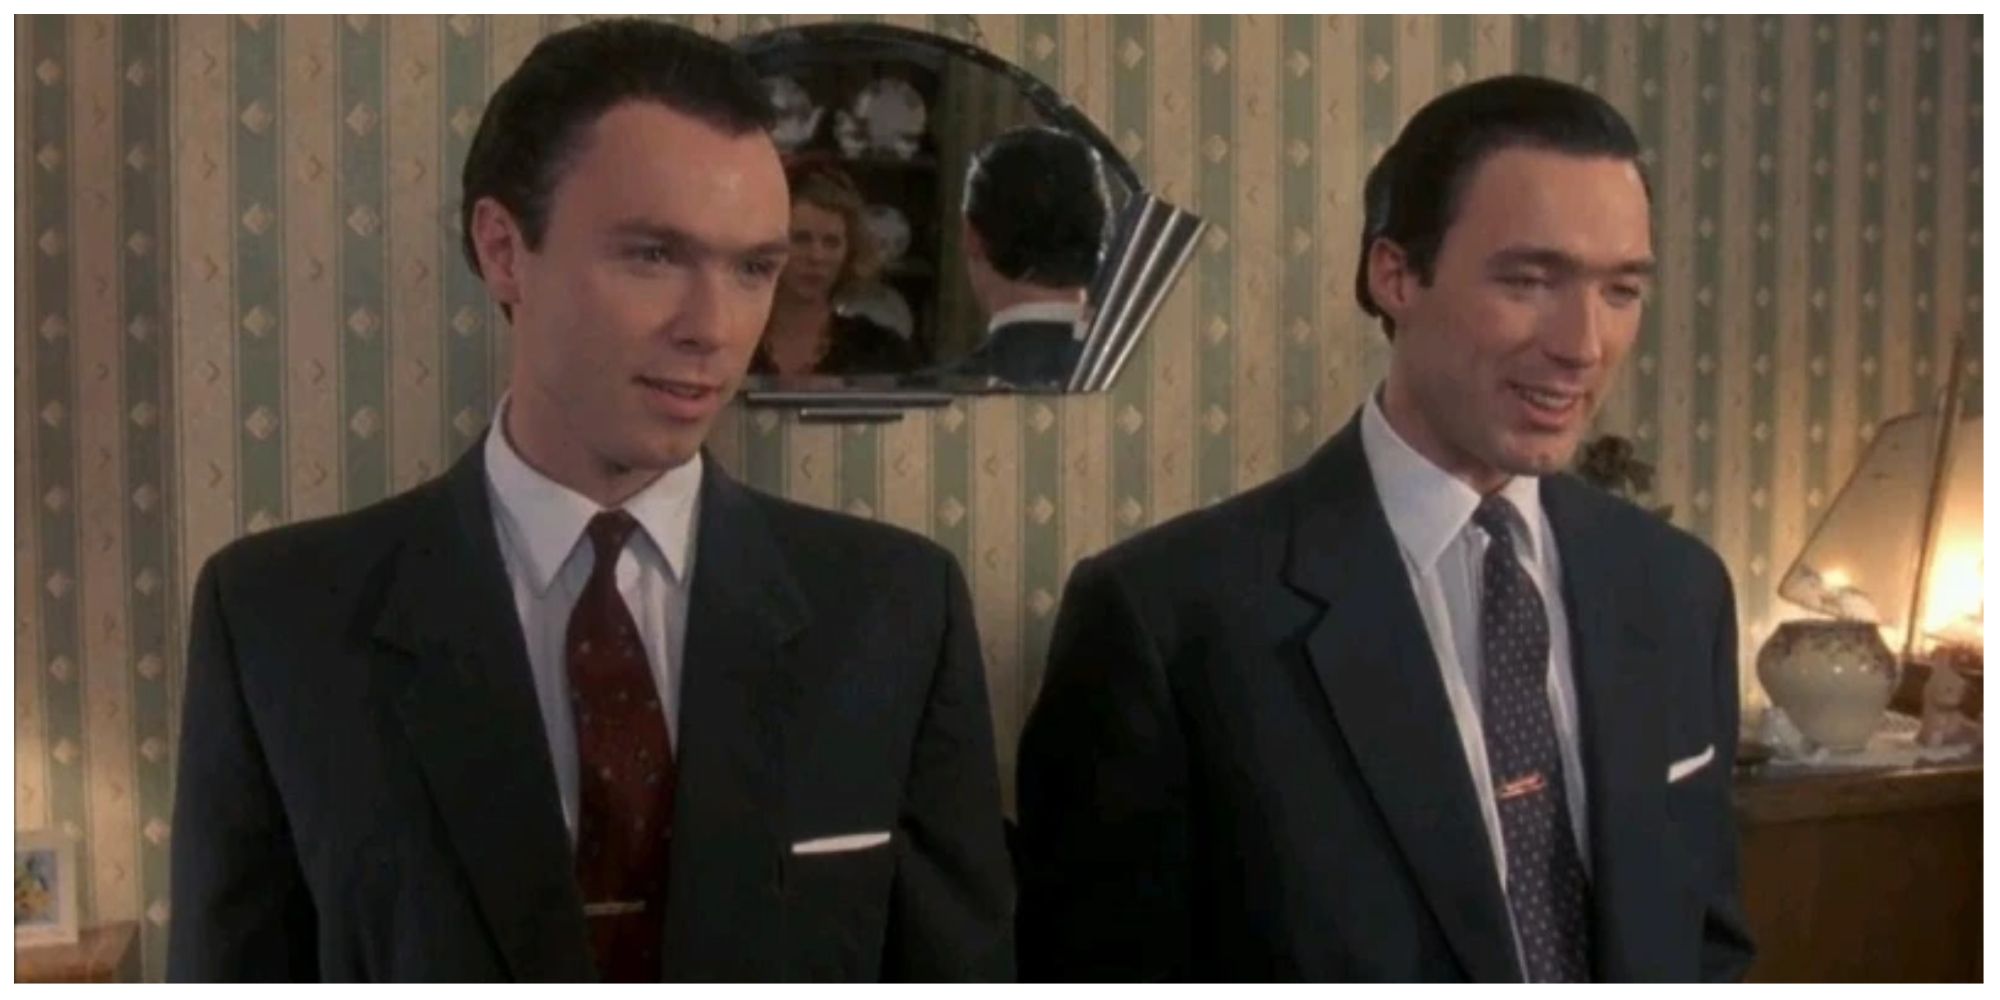 Gary and Martin Kemp starring as The Kray Twins, stood in a living room smiling at their Mother.